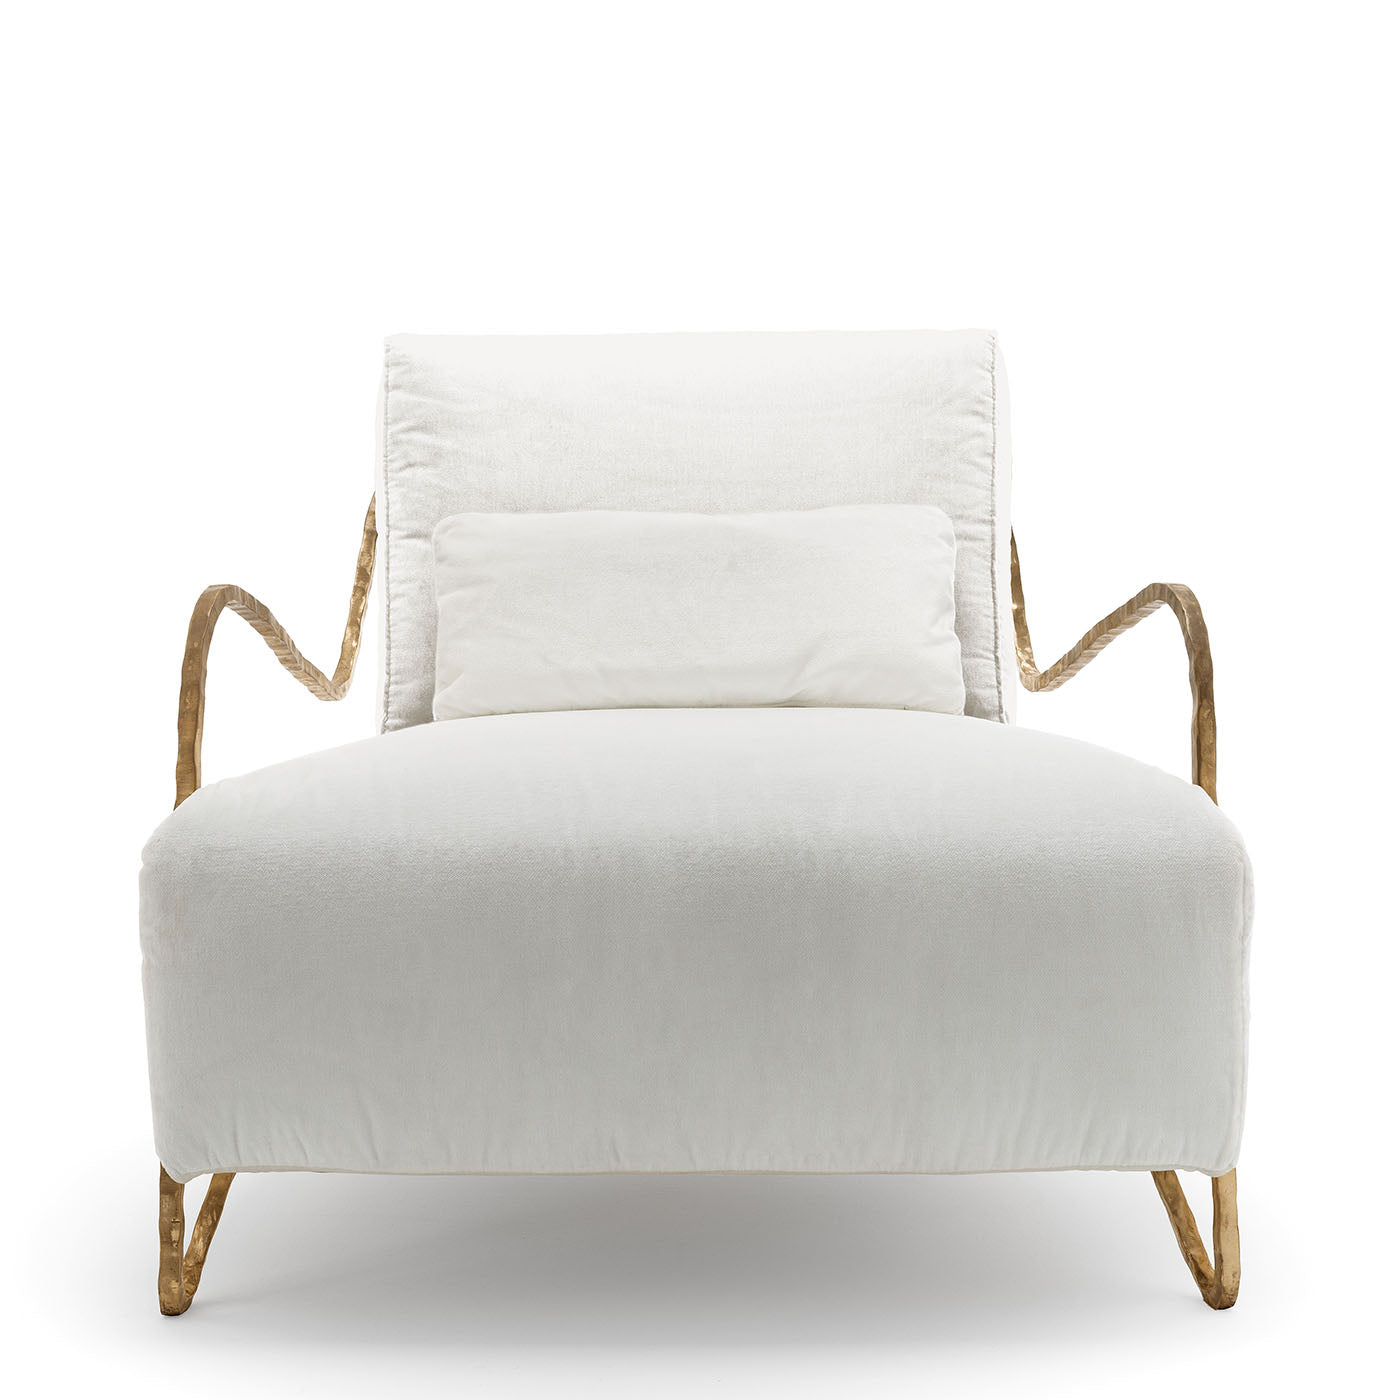 Moonlight White and Gold Low Armchair - Alternative view 1